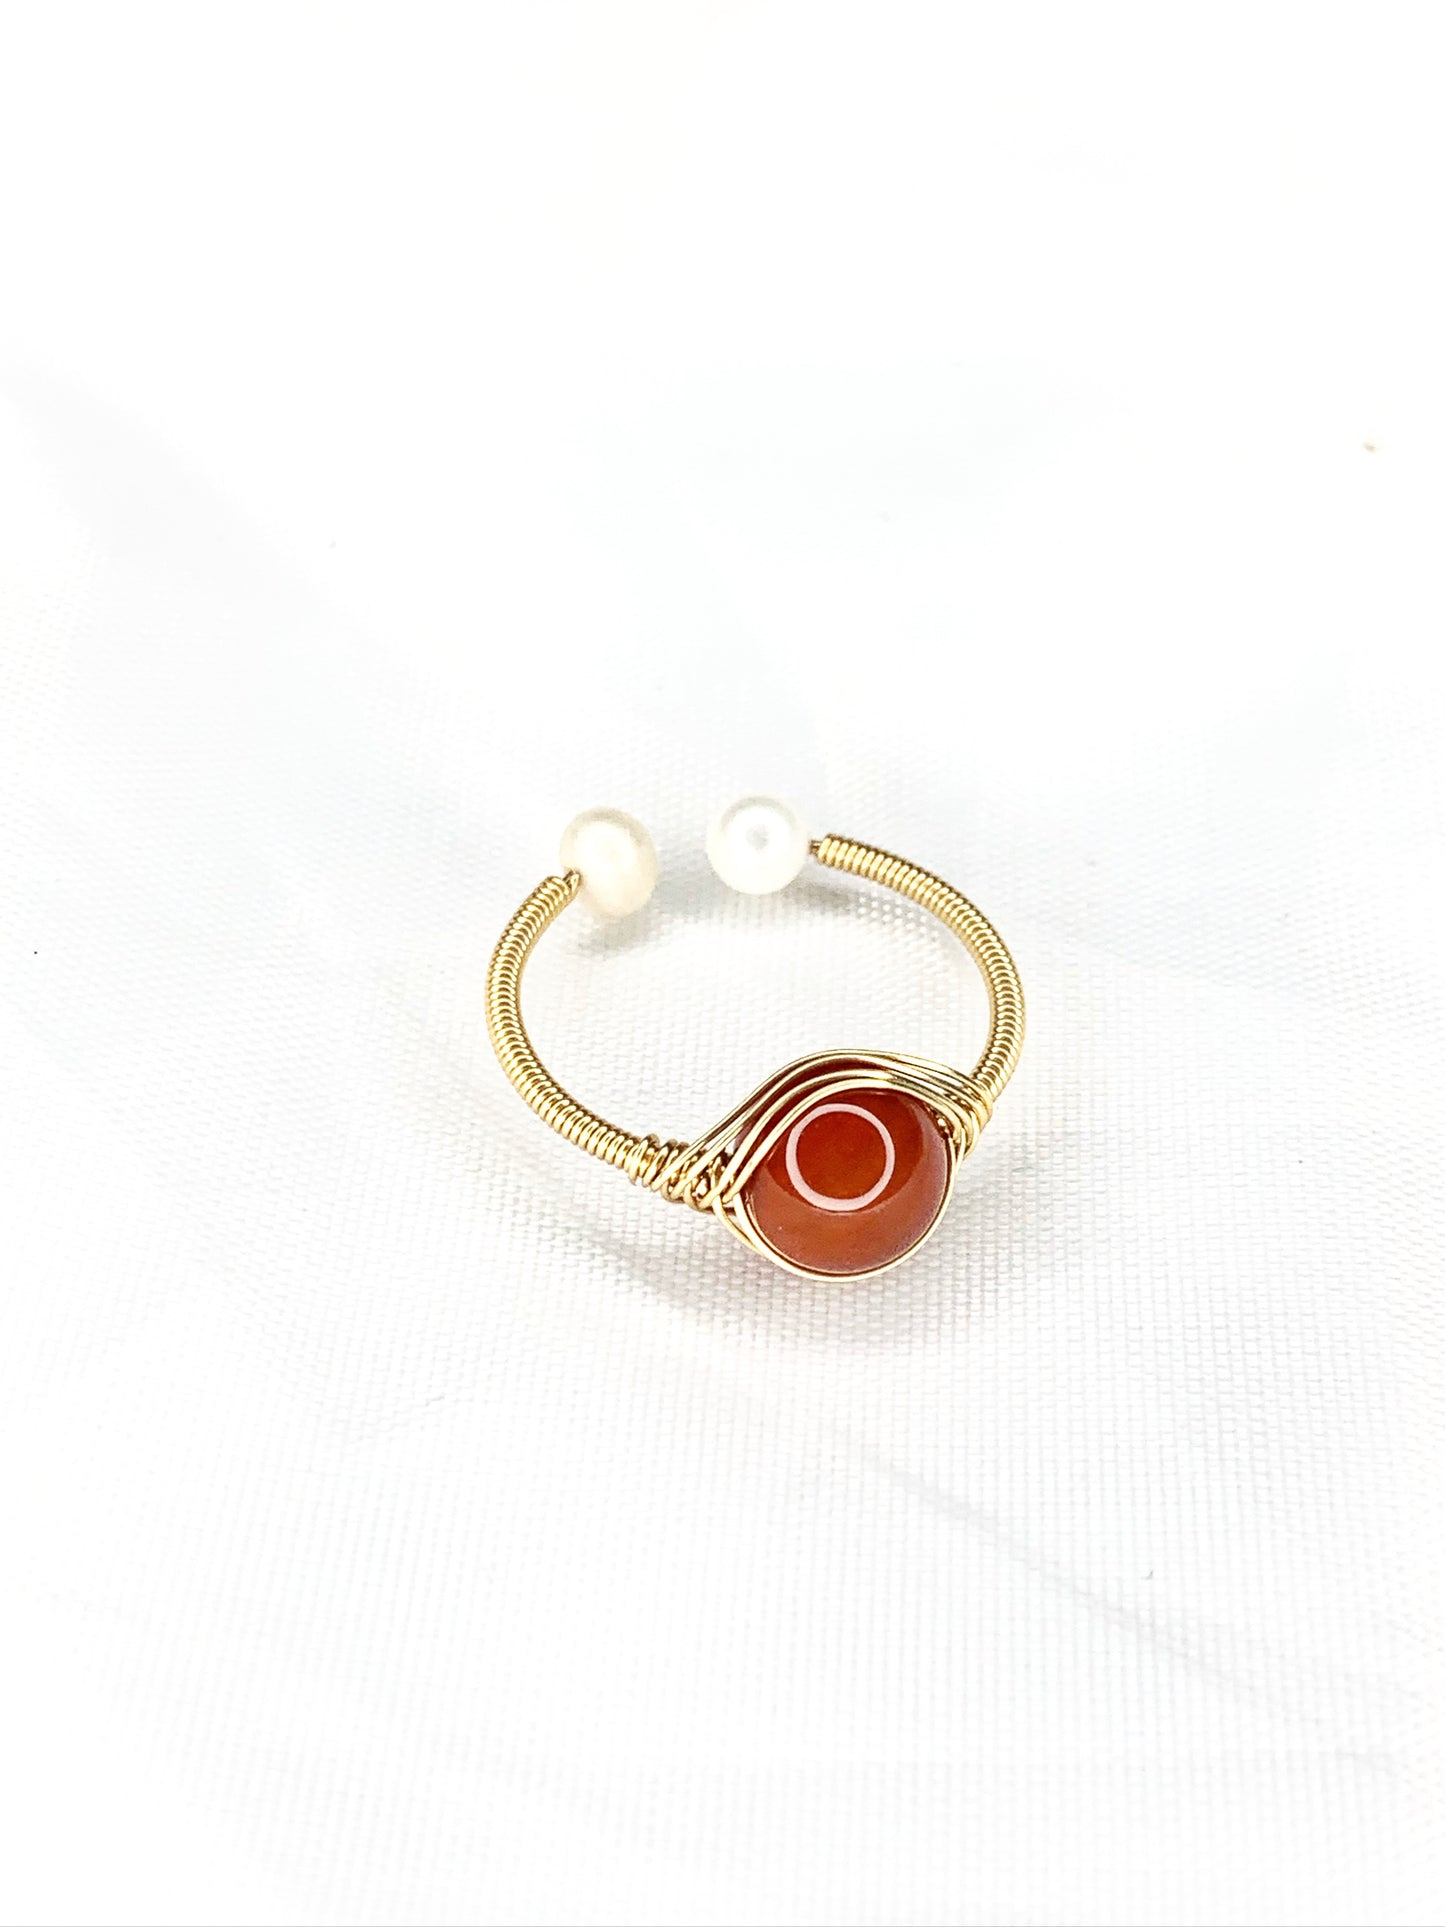 South Red Agate Ring